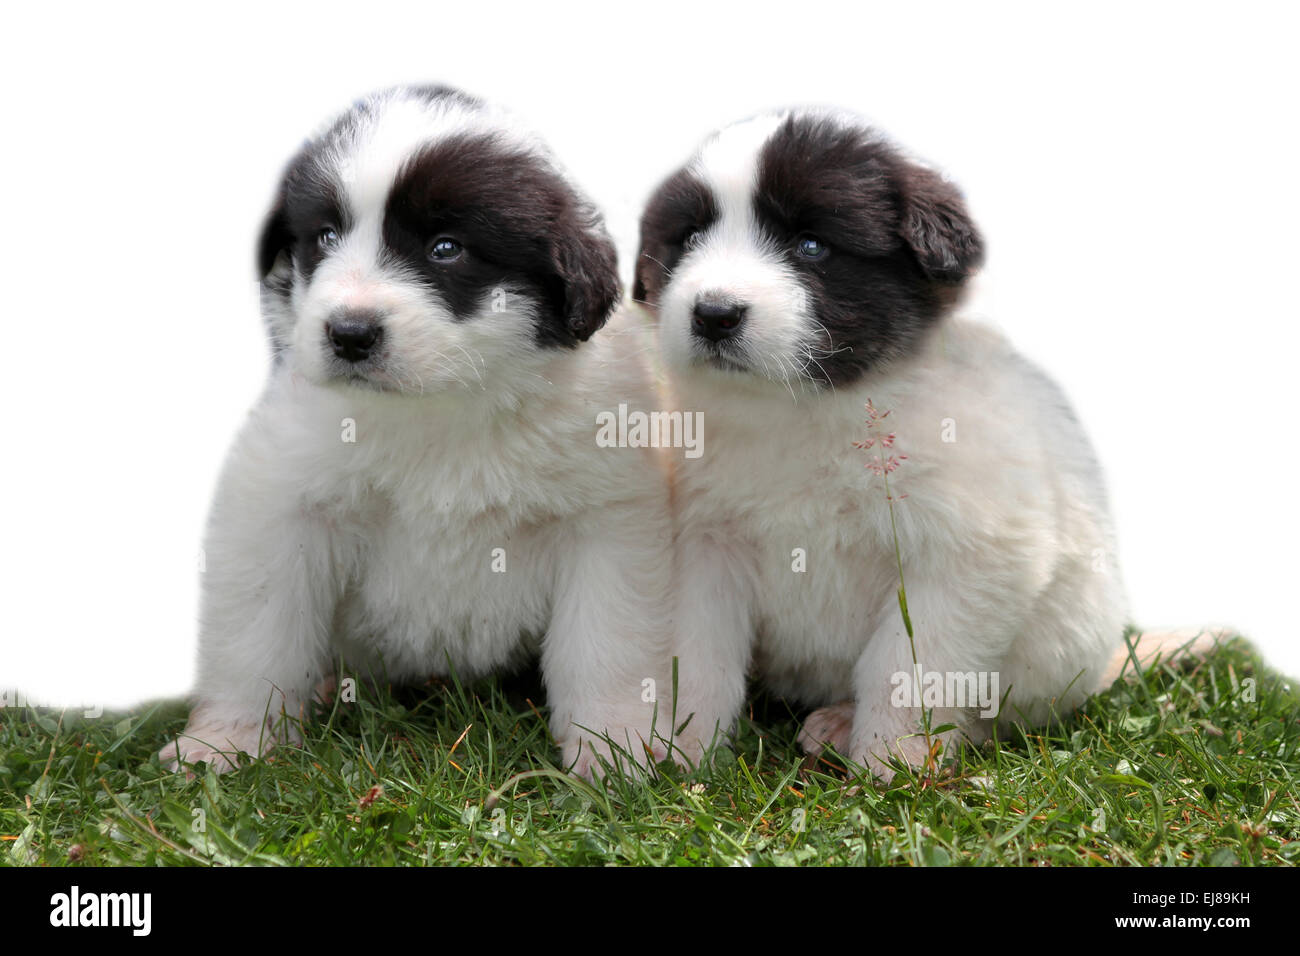 Cute dogs isolated Stock Photo